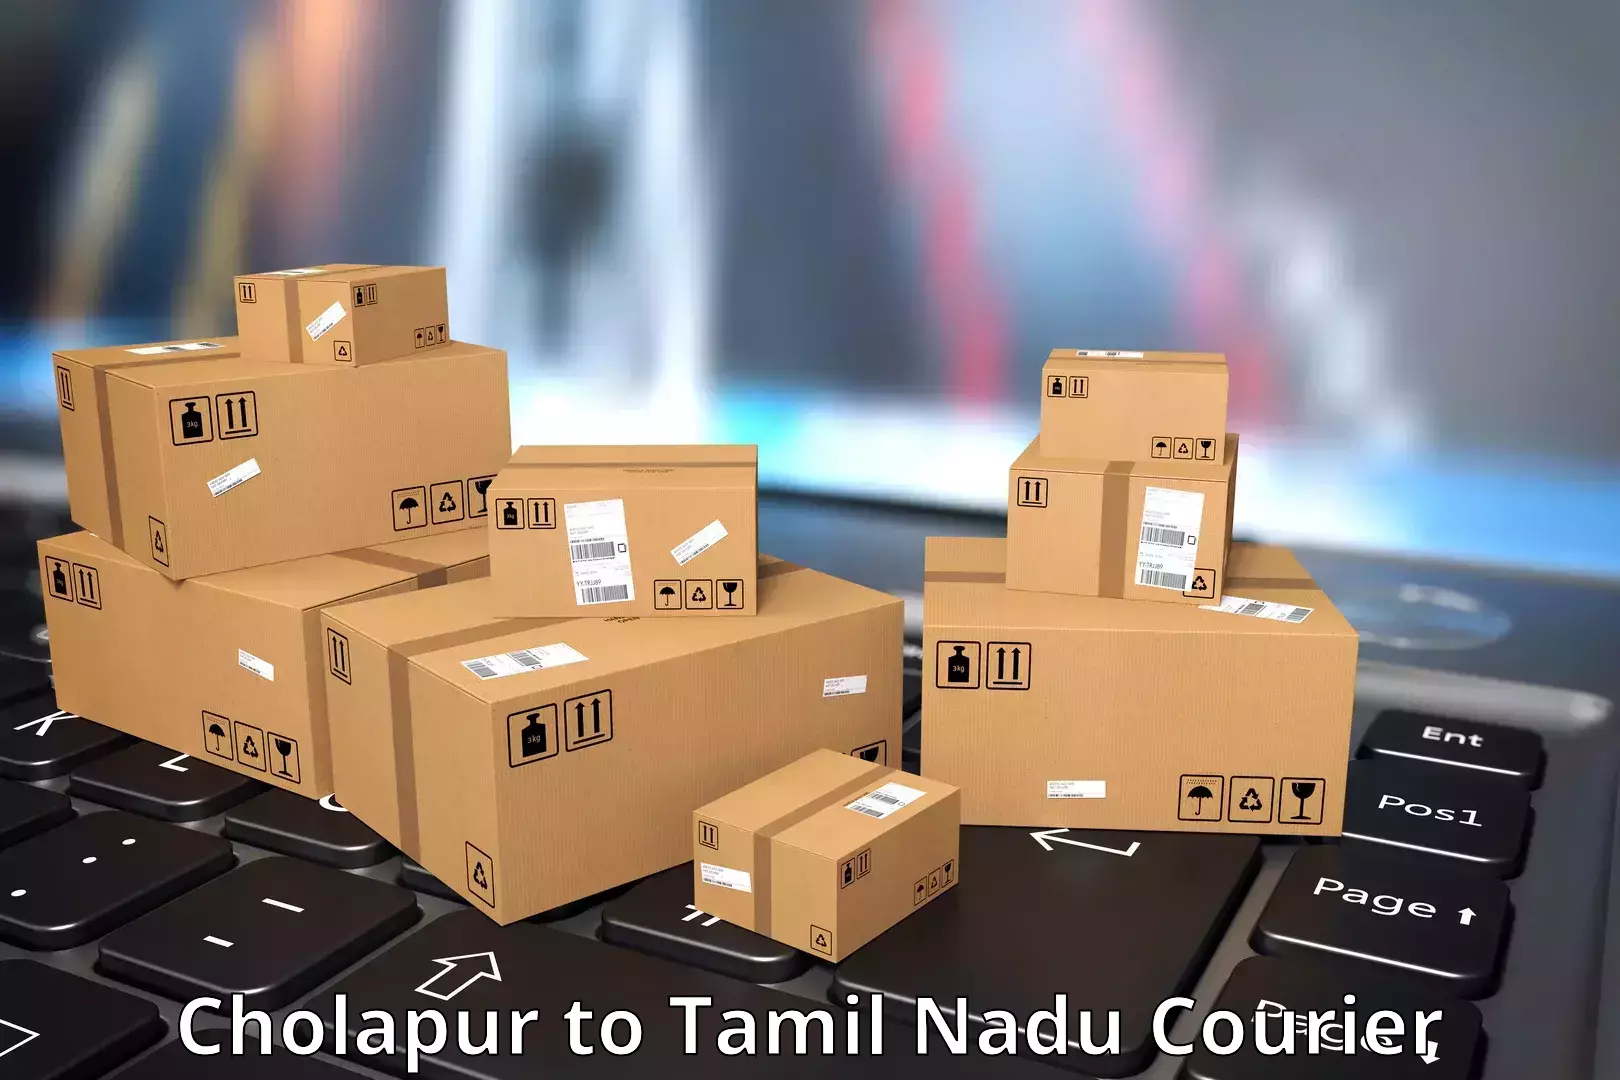 User-friendly delivery service Cholapur to Trichy